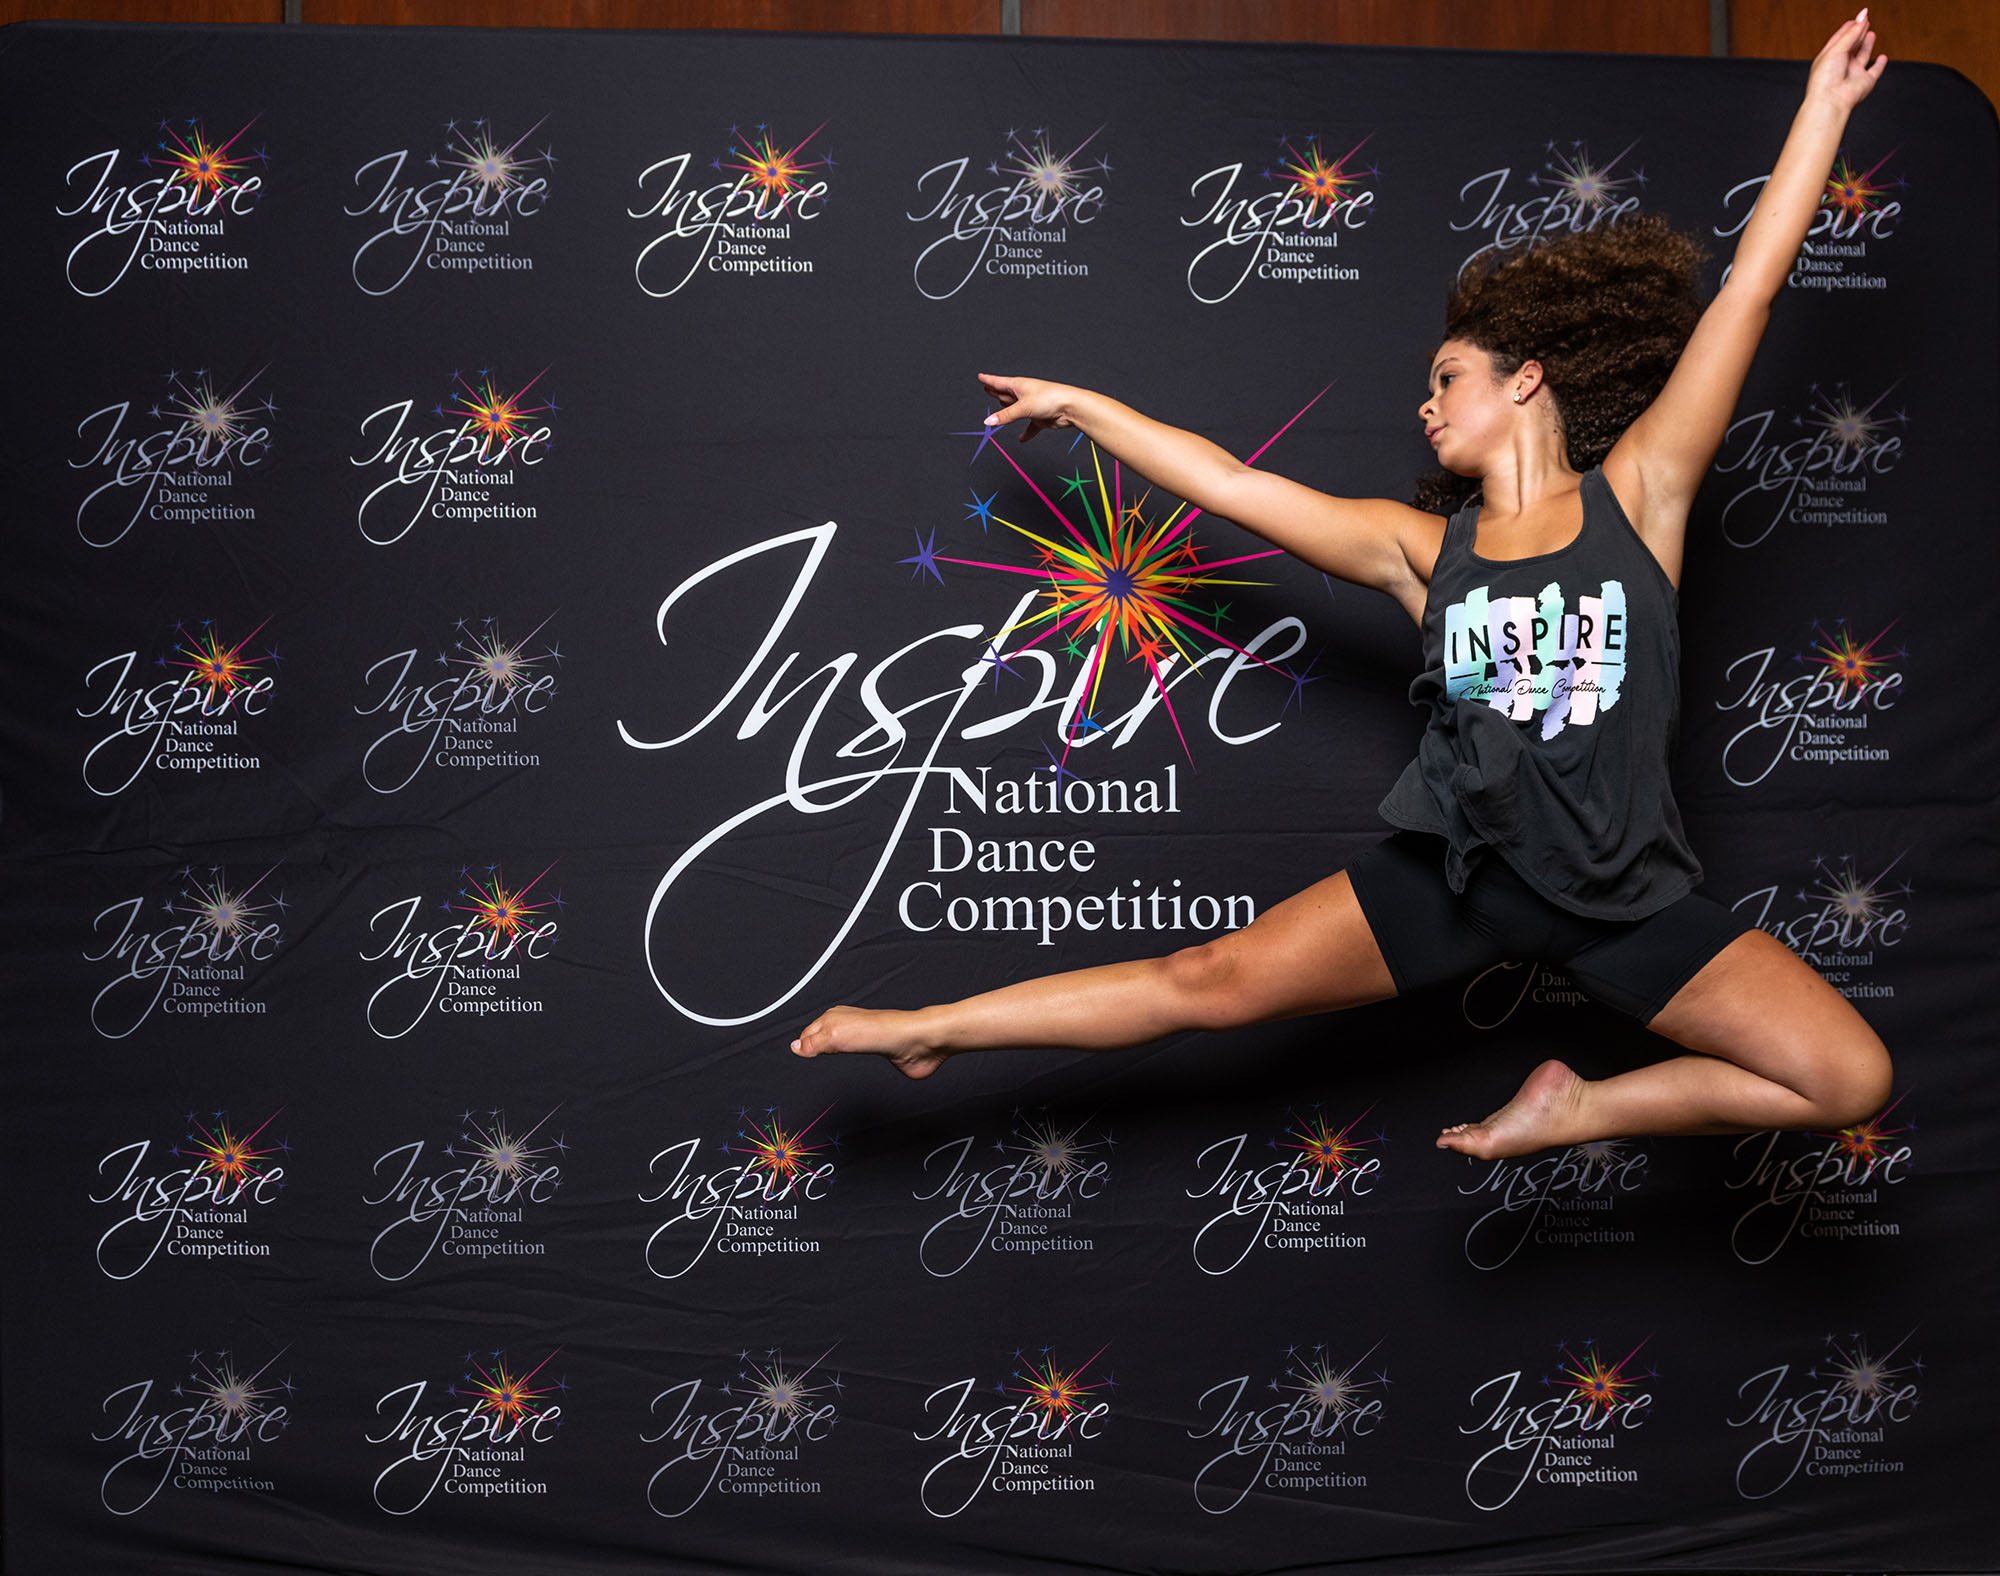 Face of INSPIRE | INSPIRE National Dance Competition